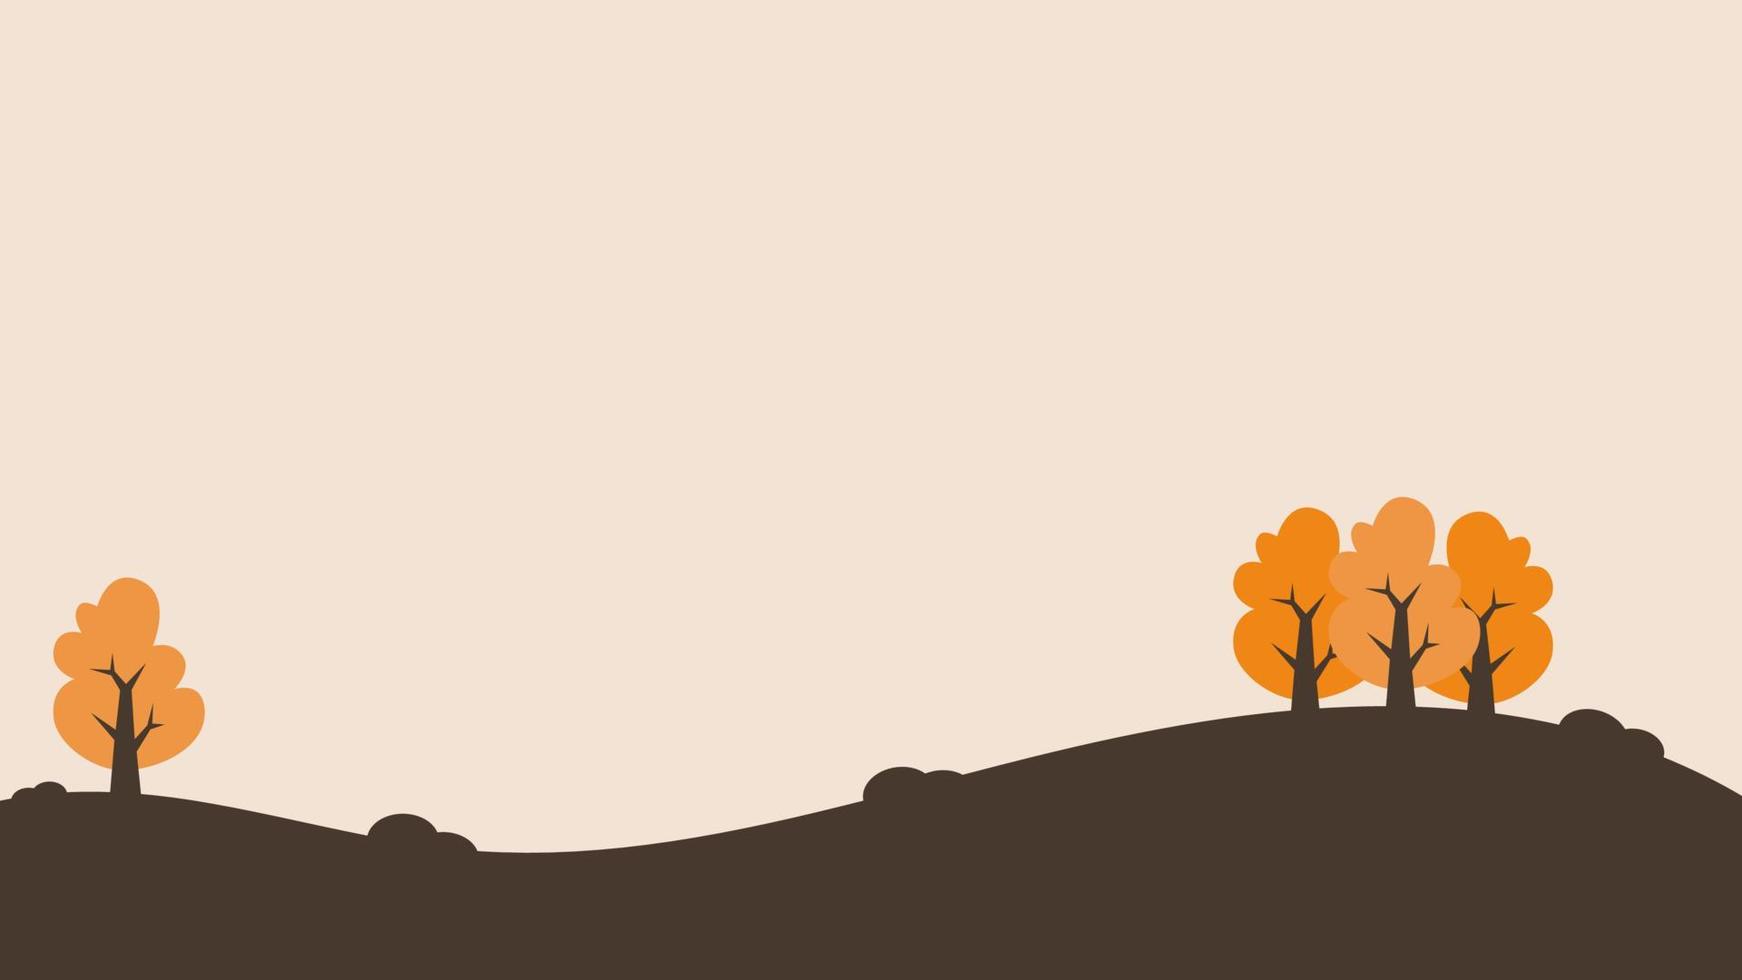 Park or hill in autumn season with orange trees with blank background for text. Suitable element for recreation, picnic, and outdoor design vector